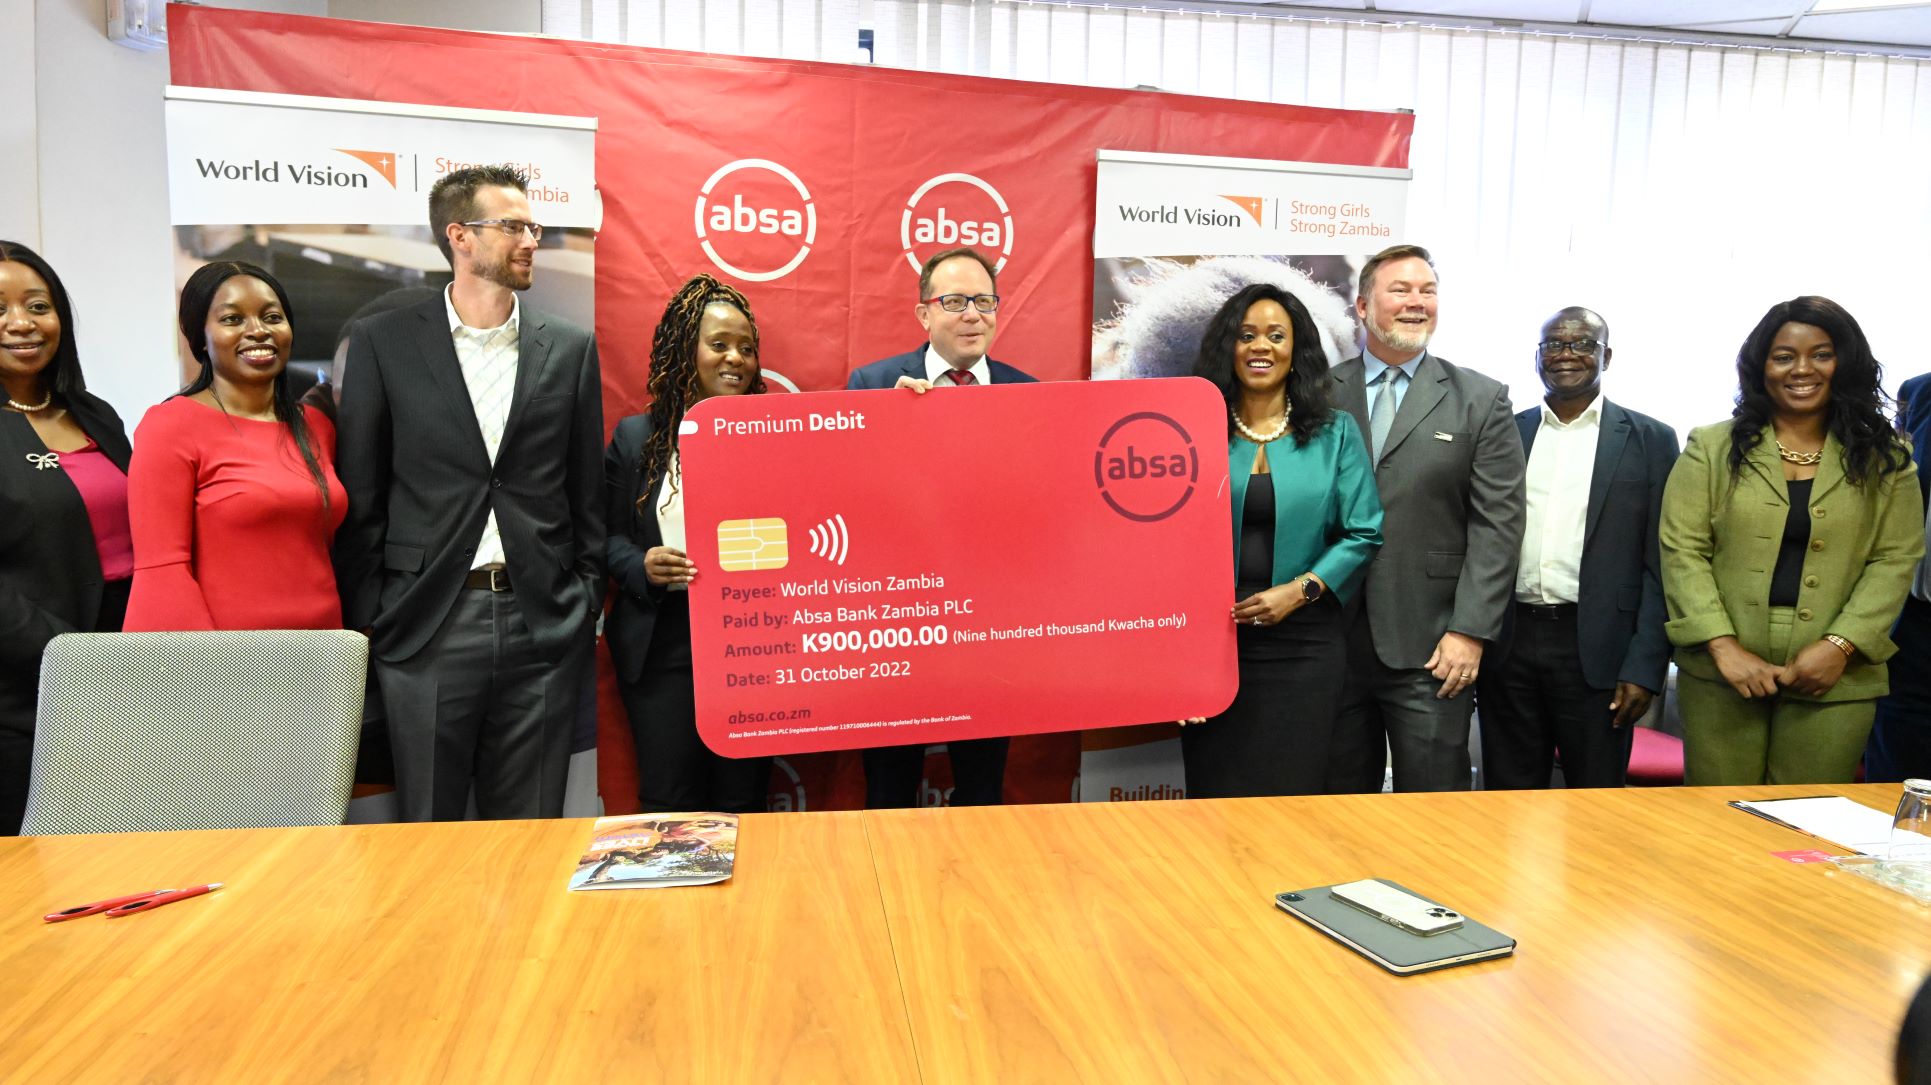 World Vision Zambia and Absa Bank Zambia representatives pose with the dummy cheque during the MoU signing ceremony.